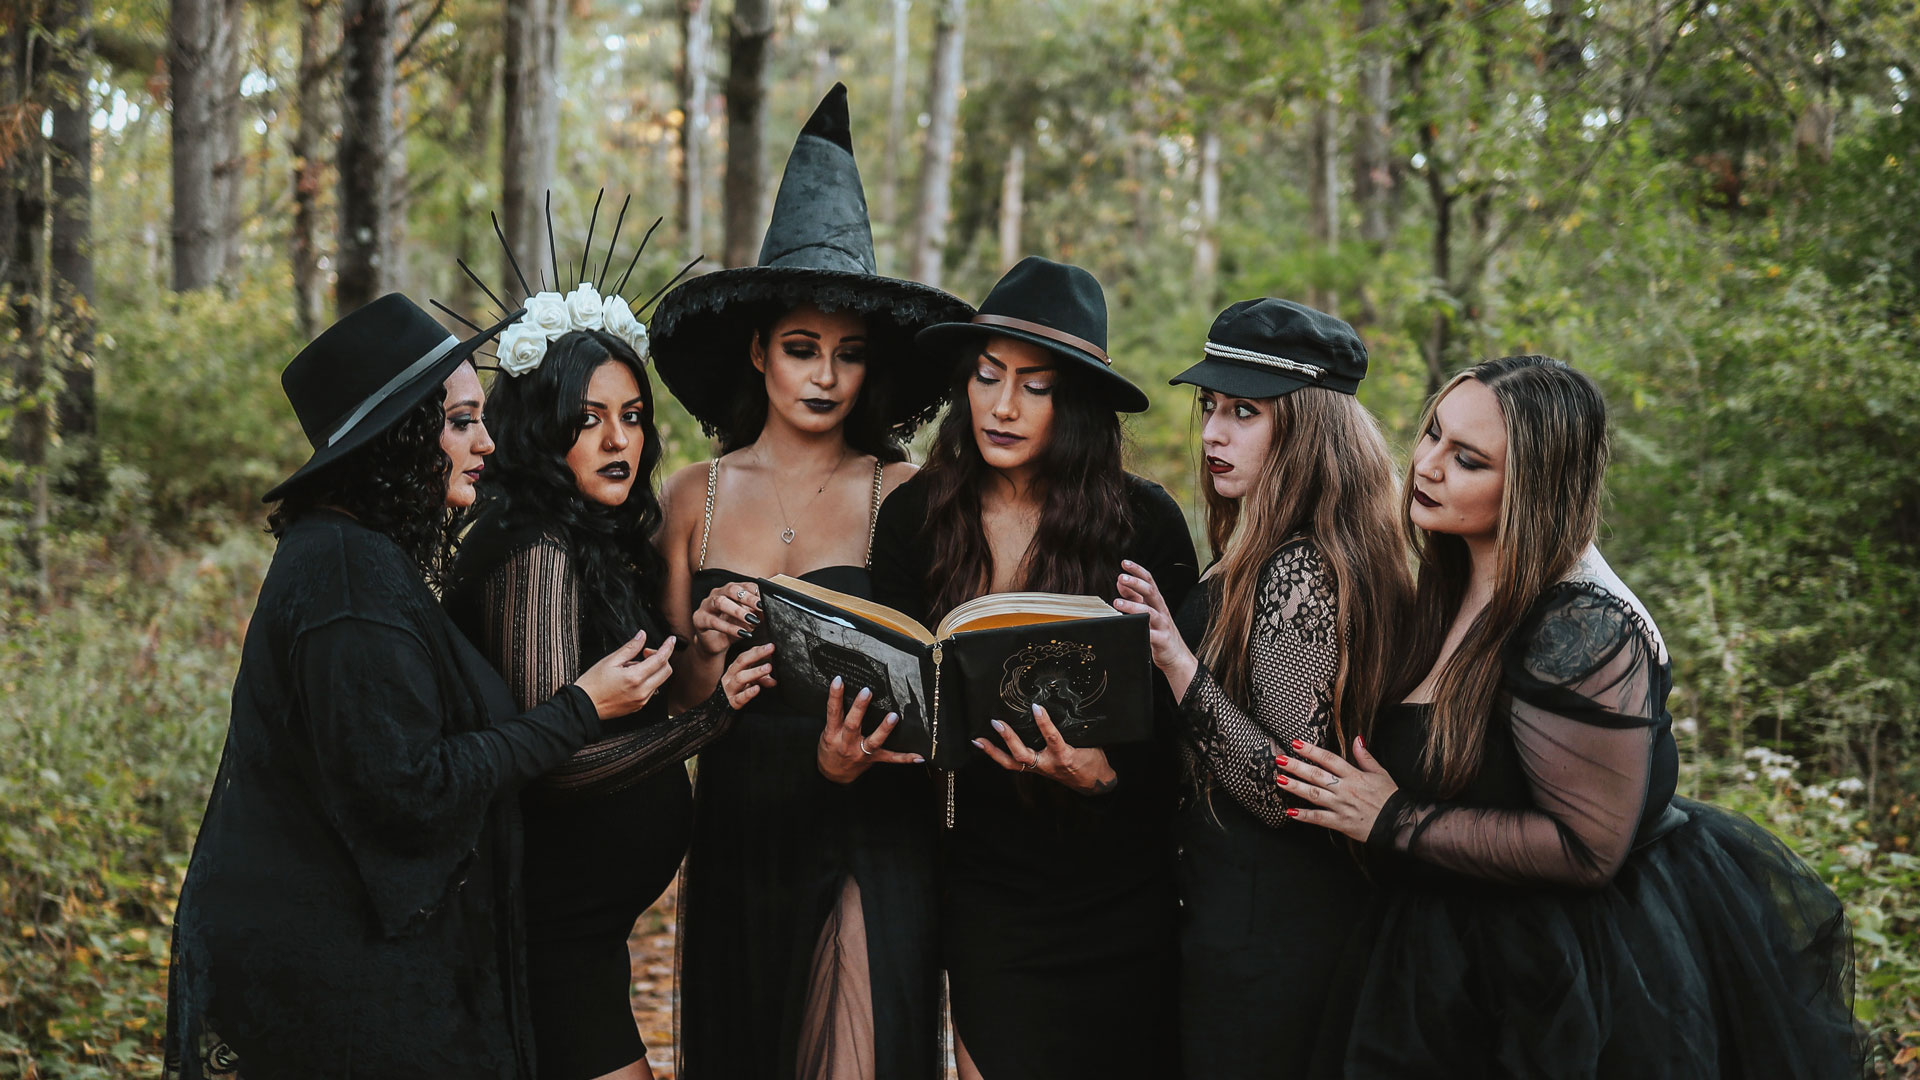 The witch is a post-#MeToo icon of defiance, solidarity and